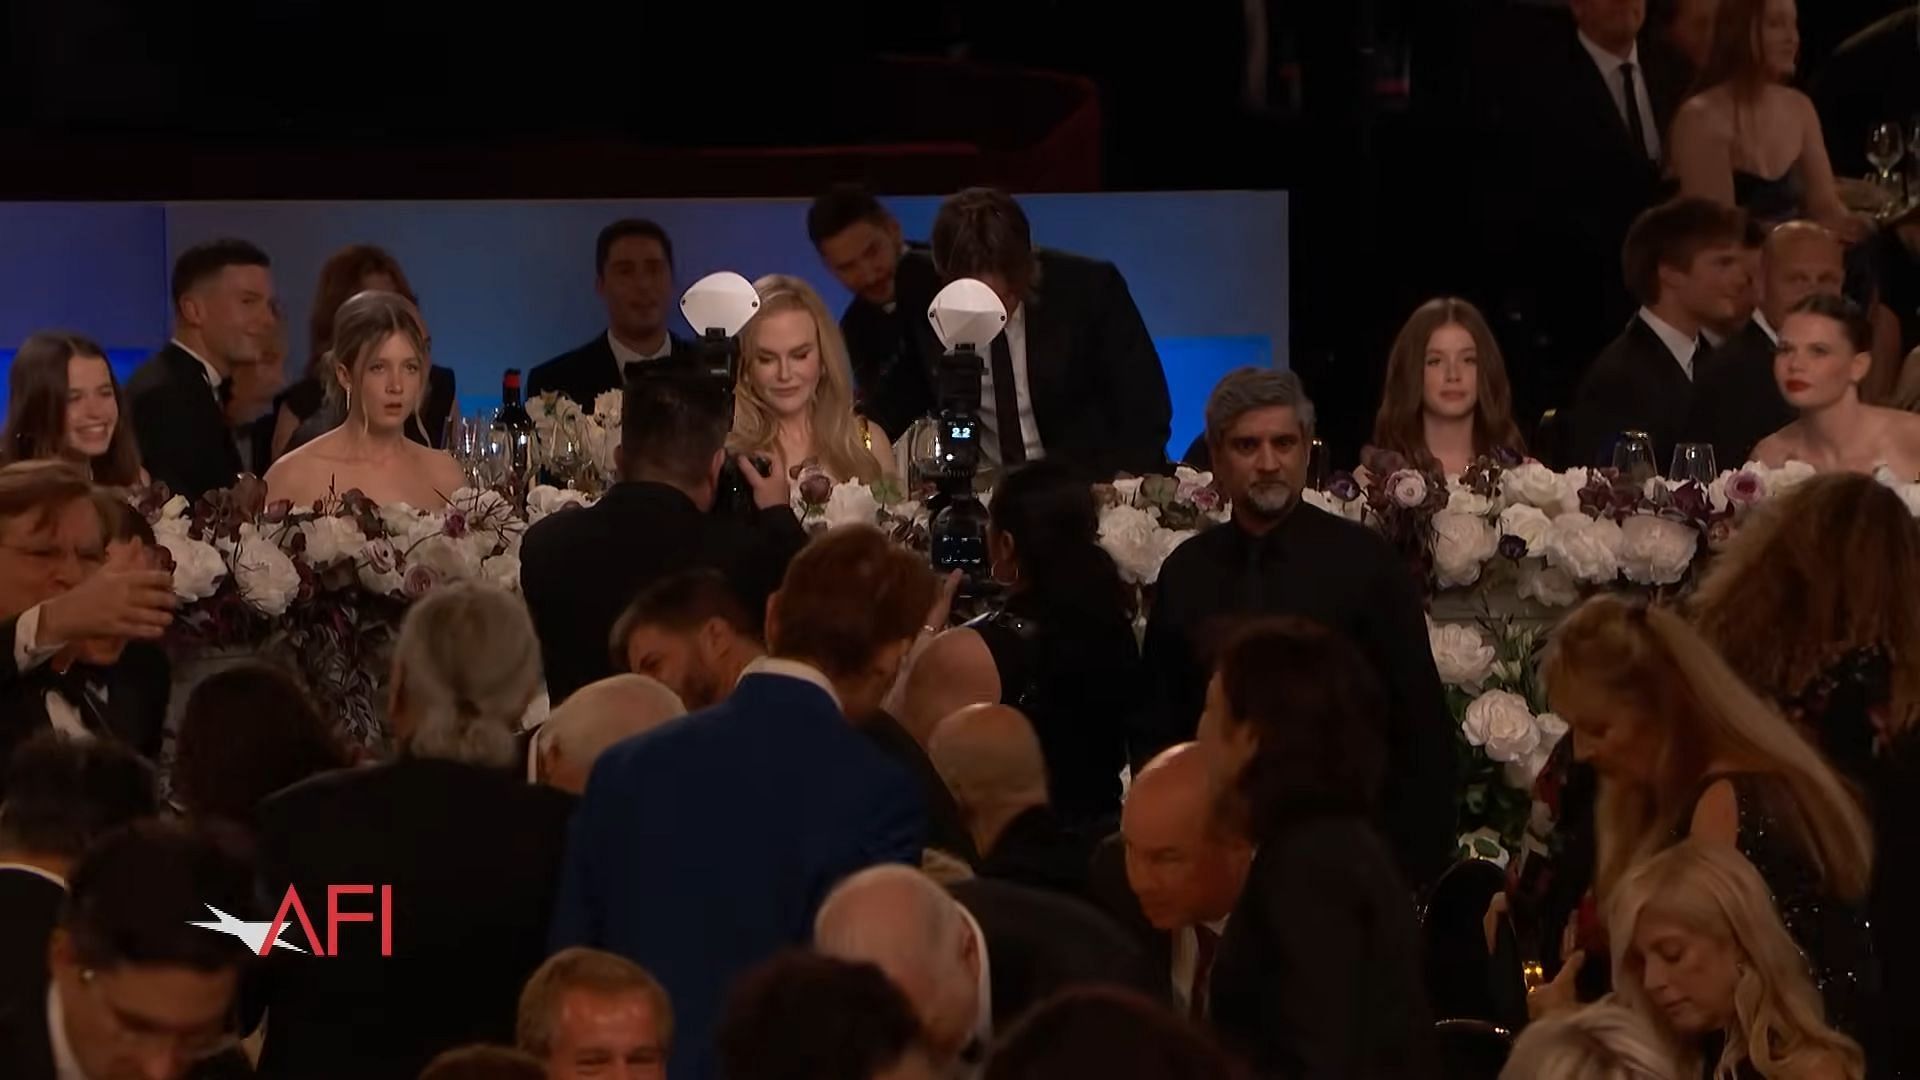 Nicole Kidman at the event with both her daughters on either side (Image via YouTube/American Film Institute)